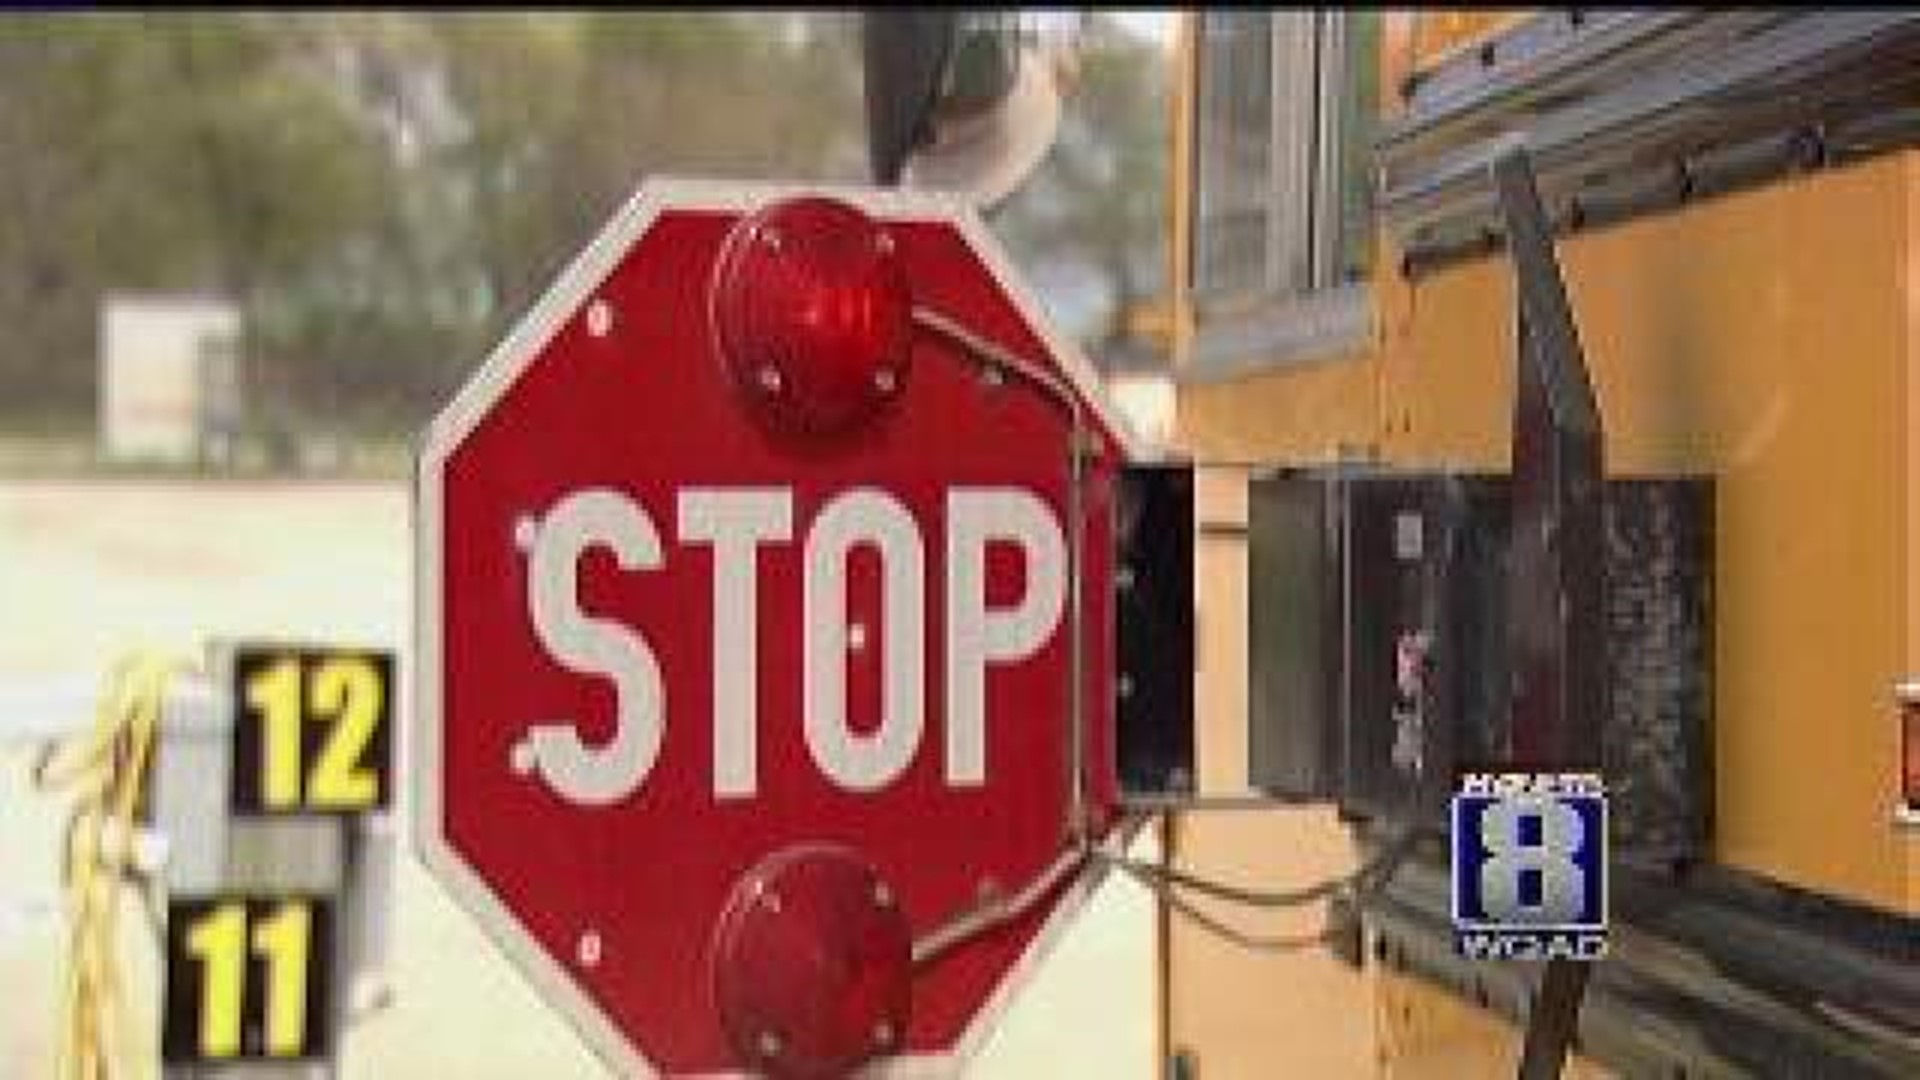 National school bus safety law proposed